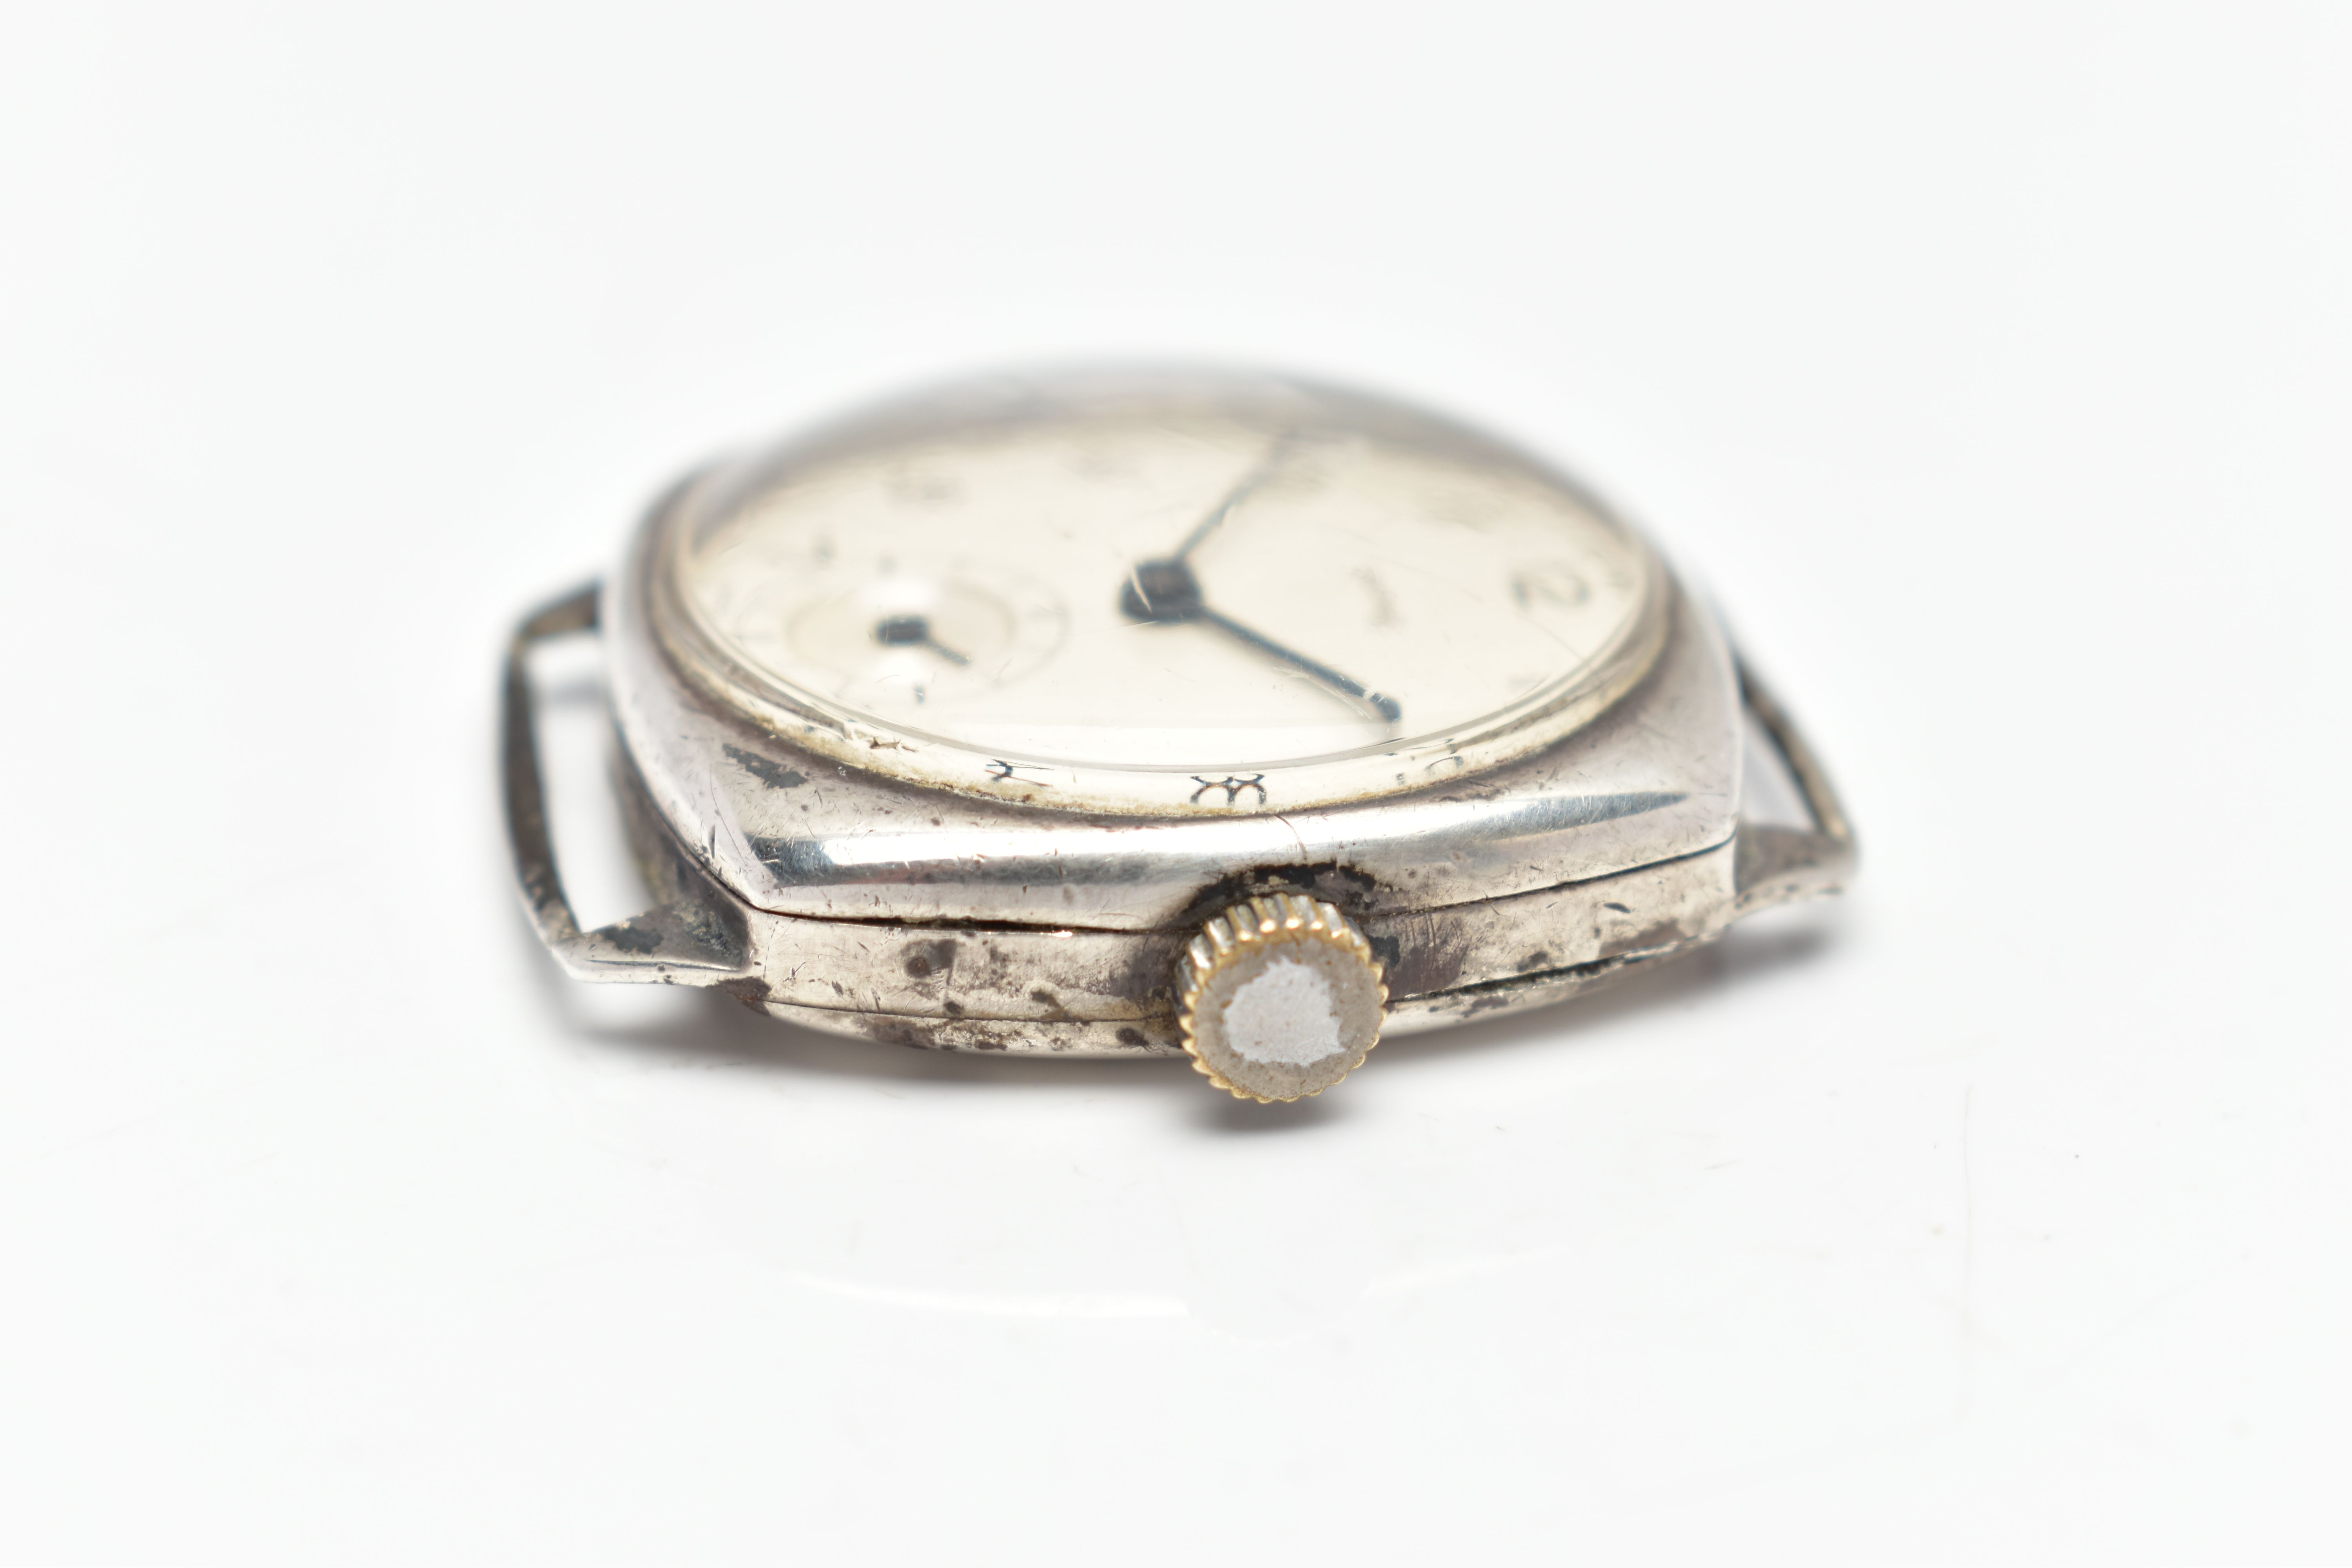 A WHITE METAL SMITHS WATCH HEAD, manual wind, cream colour dial, with Arabic hourly markers, - Image 3 of 6